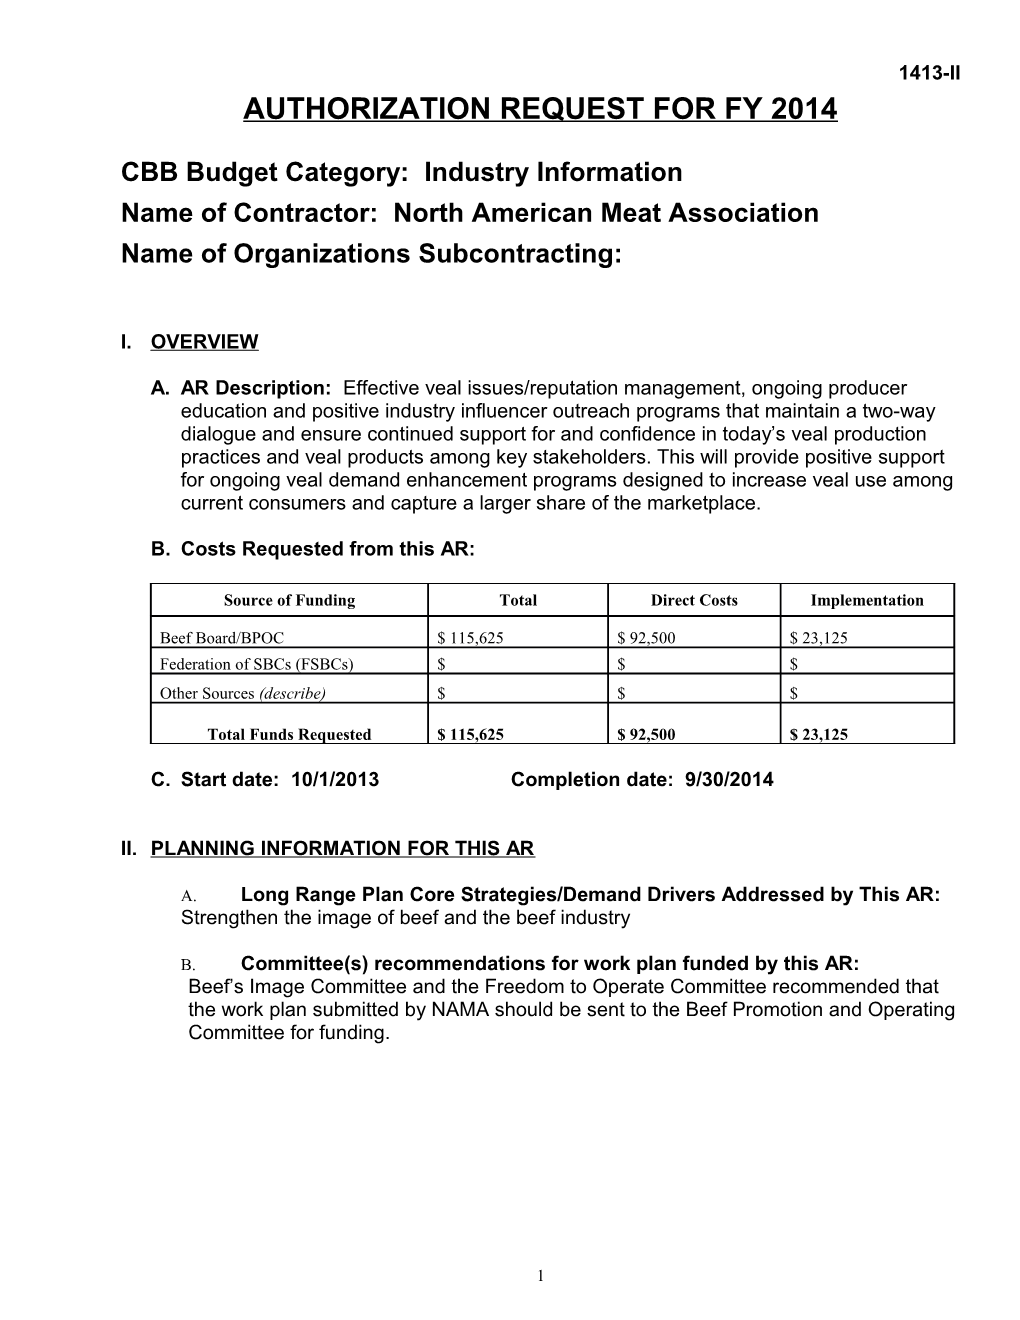 CBB Budget Category: Industry Information